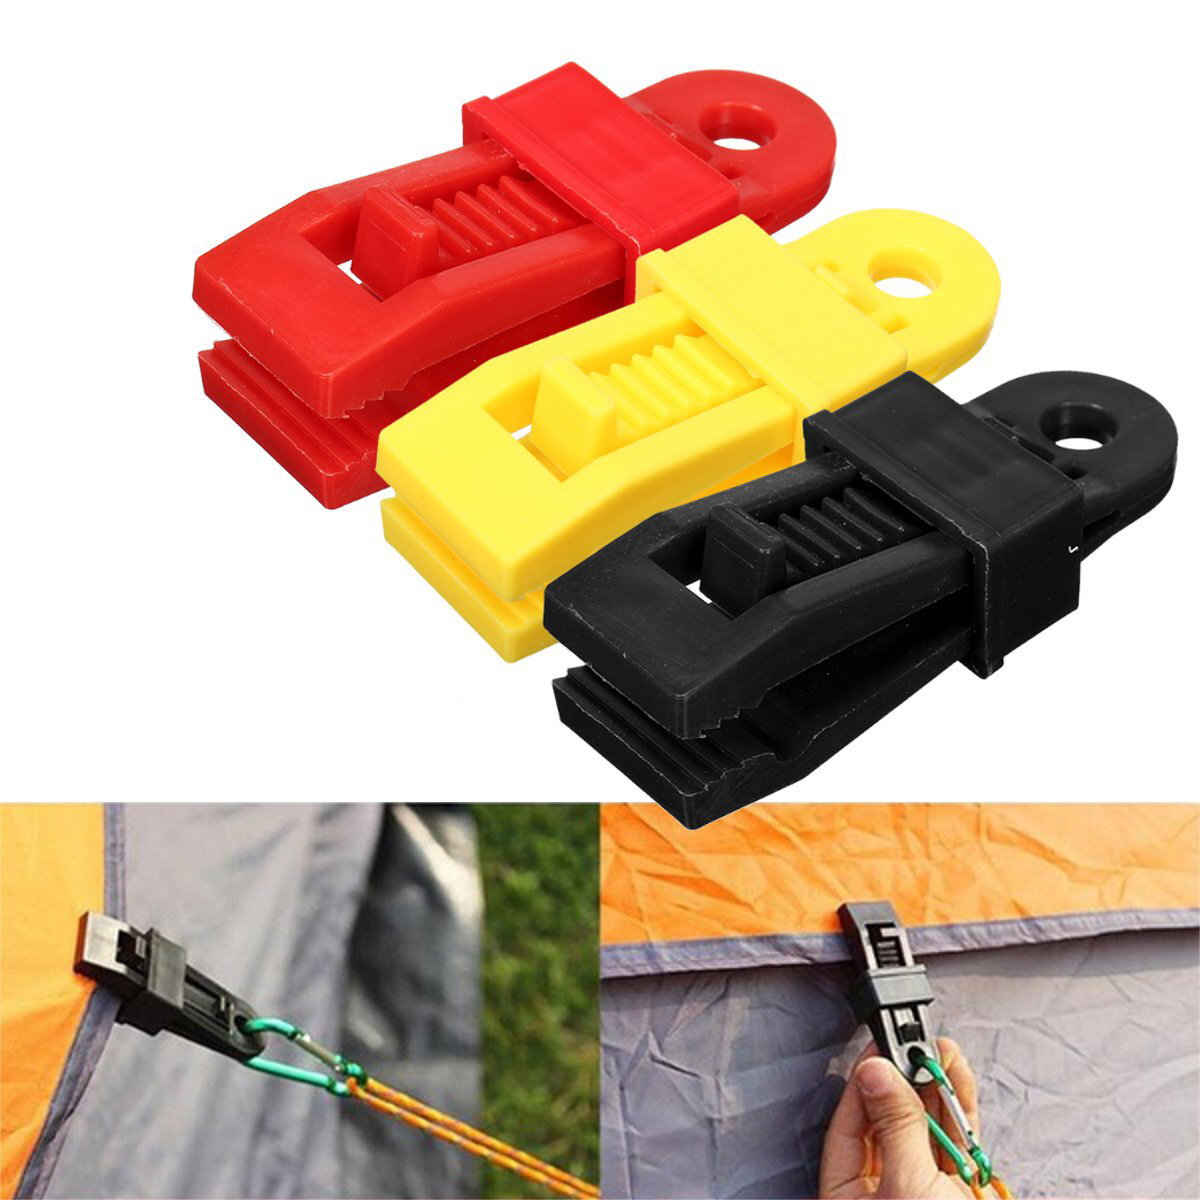 24 PCS Plastic Reusable Tent Clip Tent Buckle Outdoor Camping Tent Tool-Yellow/Red/Black 